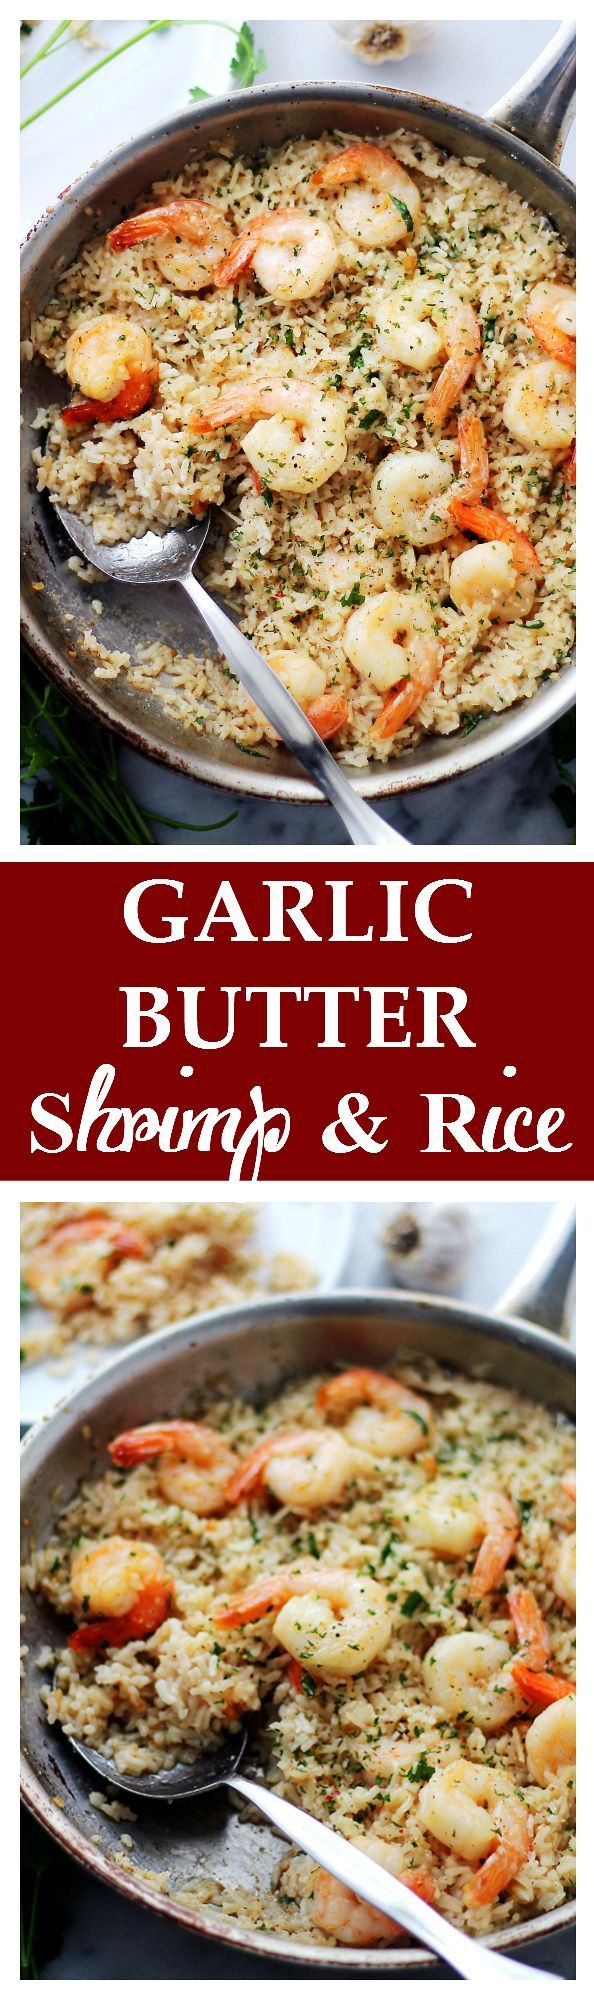 Garlic Butter Shrimp and Rice – Garlic Butter lends an amazing flavor to this speedy and incredibly de